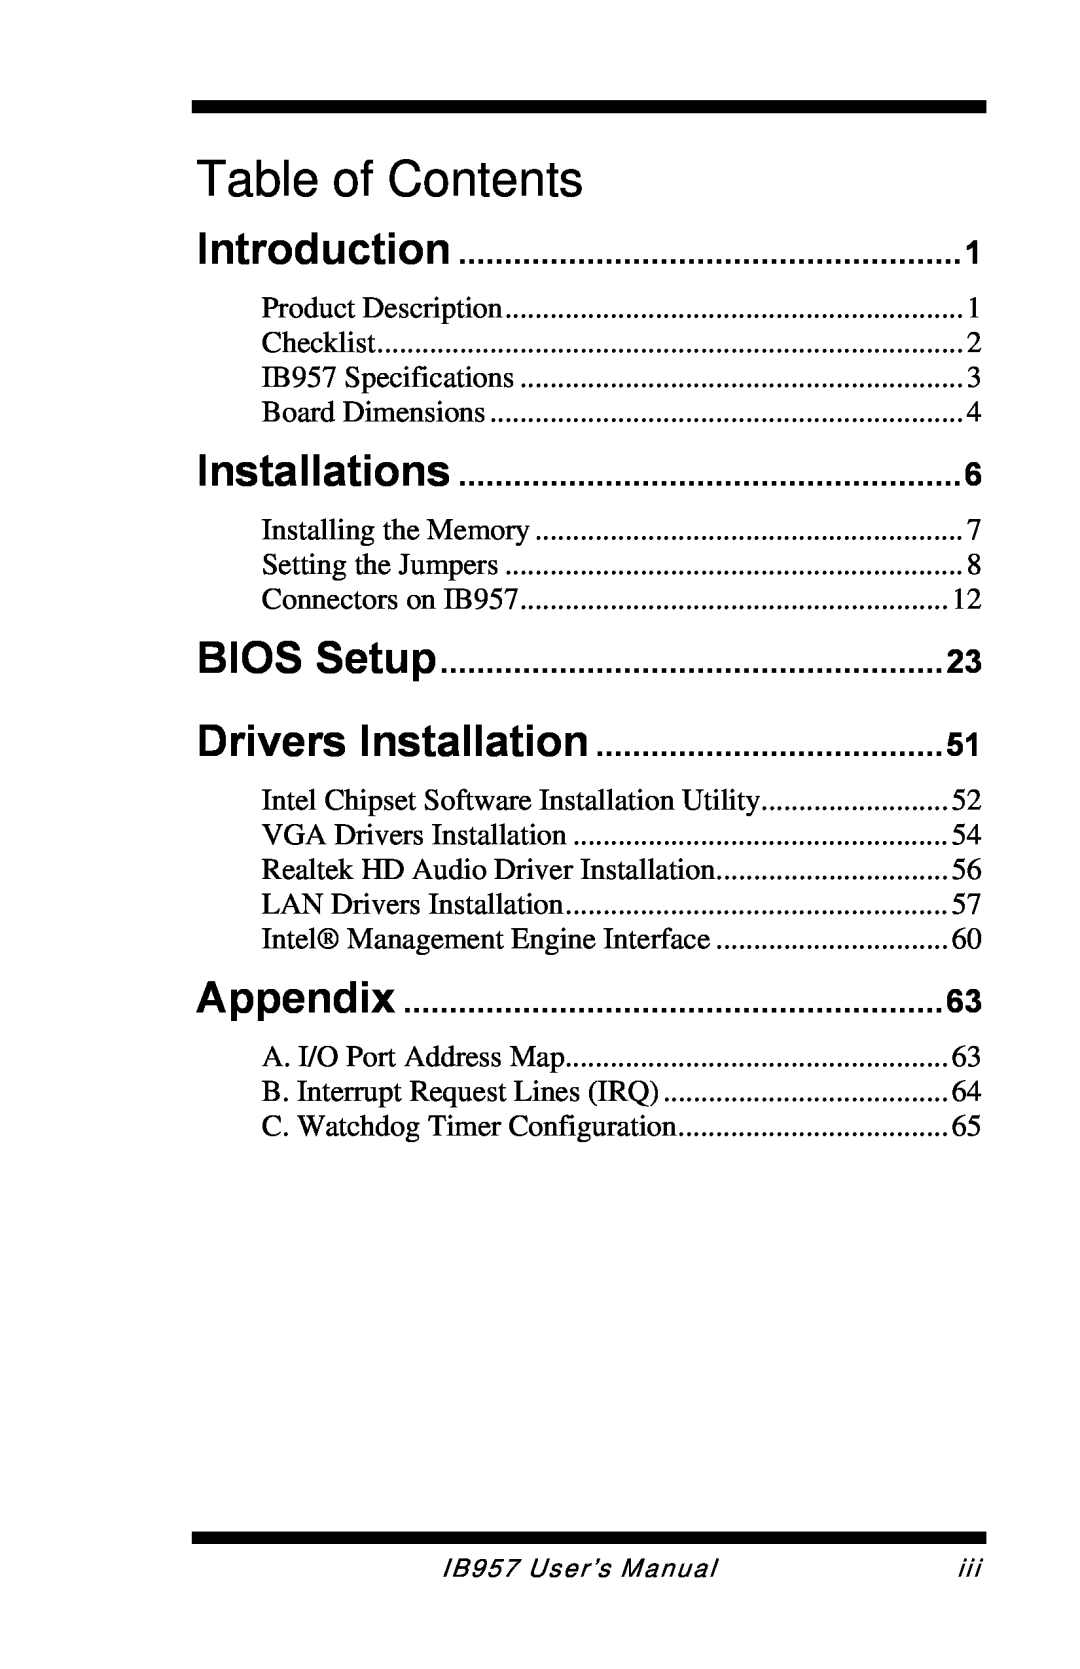 Intel IB957 user manual Introduction, Installations, BIOS Setup, Drivers Installation, Appendix, Table of Contents 